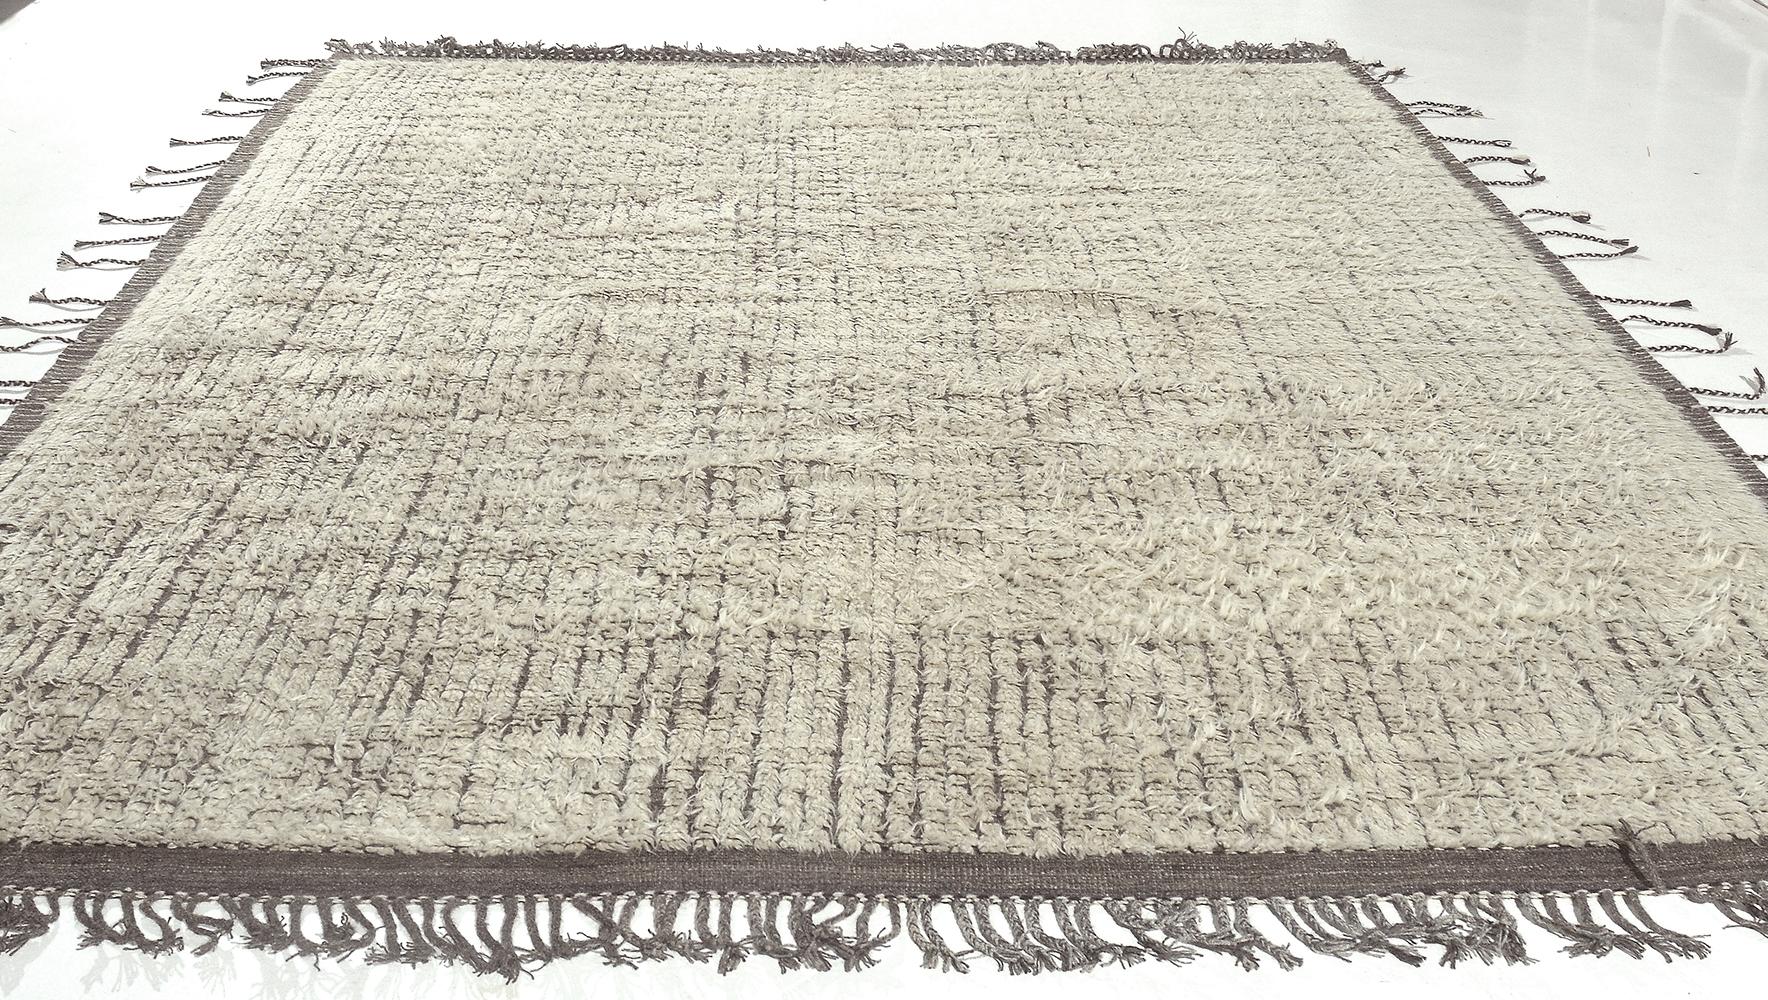 A beautiful and trendy modern Boho Chic rug, rug type / origin: Central Asian rug, date: circa modern rug. Size: 9 ft 3 in x 12 ft 1 in (2.82 m x 3.68 m)

This carpet has a lush pile and soft, neutral tones that will add warmth to both contemporary